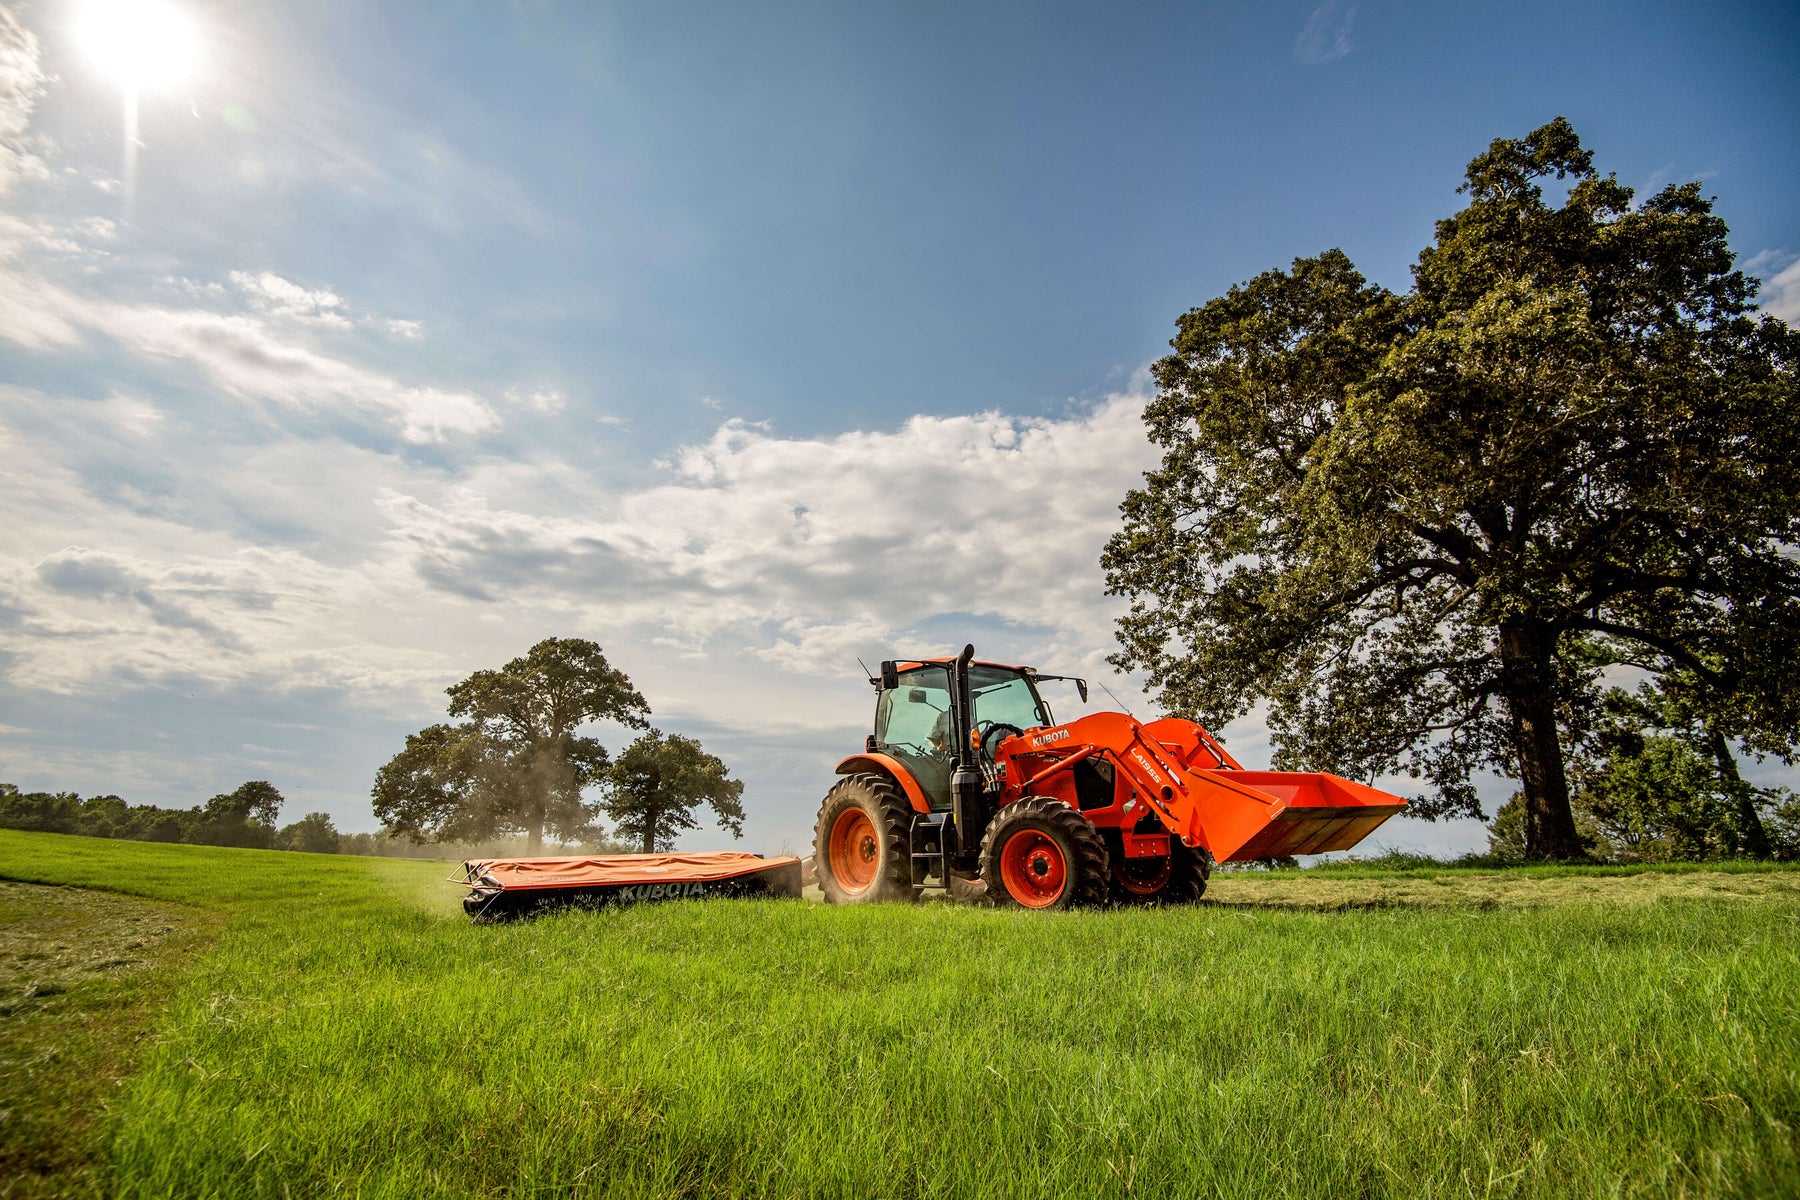 Top 10 Reasons Why Owning a Kubota Tractor is a Smart Choice